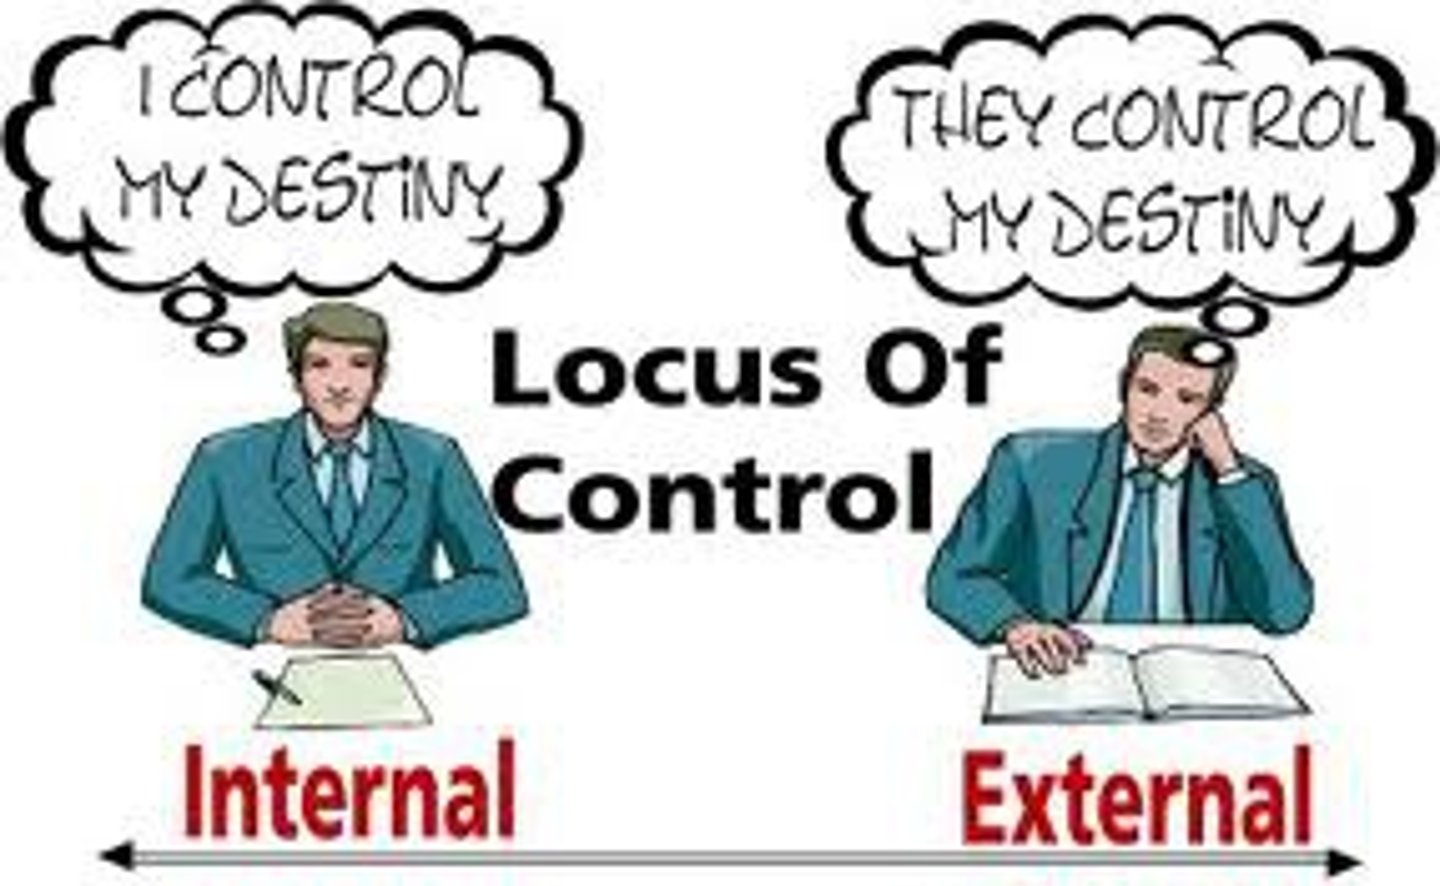 <p>Older adults show higher physician health locus of control & fate locus of control</p><p>Greater tendency to attribute their health external agents such as the physician/fate rather than their own actions</p><p>Leads to lower levels of self-efficacy & less desire for health-related information and control</p>